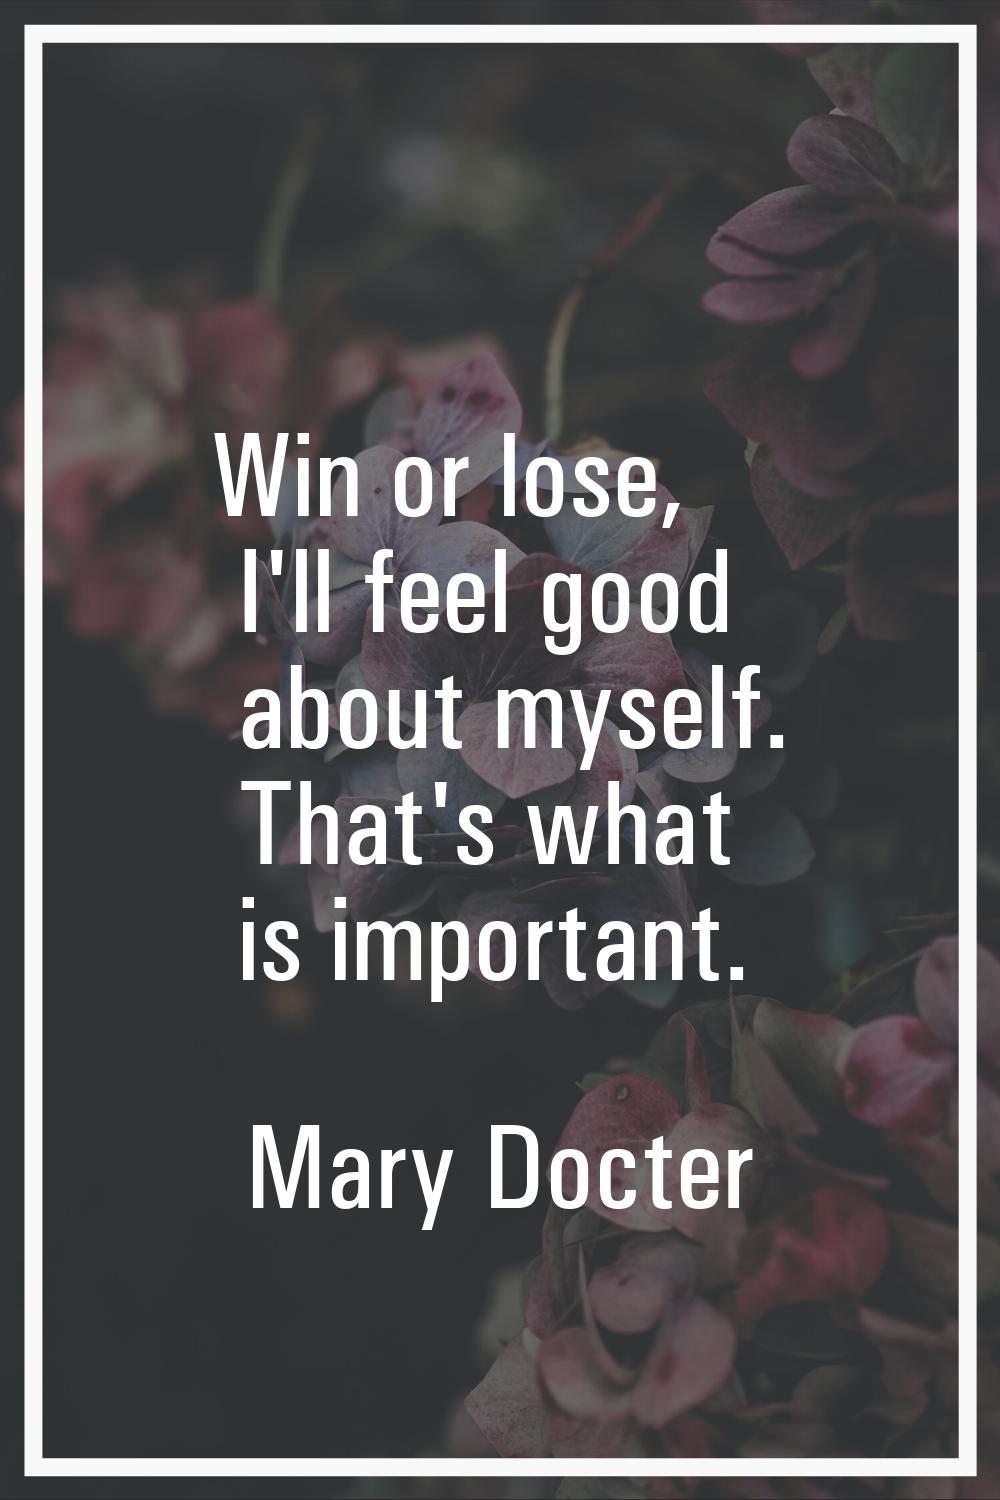 Win or lose, I'll feel good about myself. That's what is important.